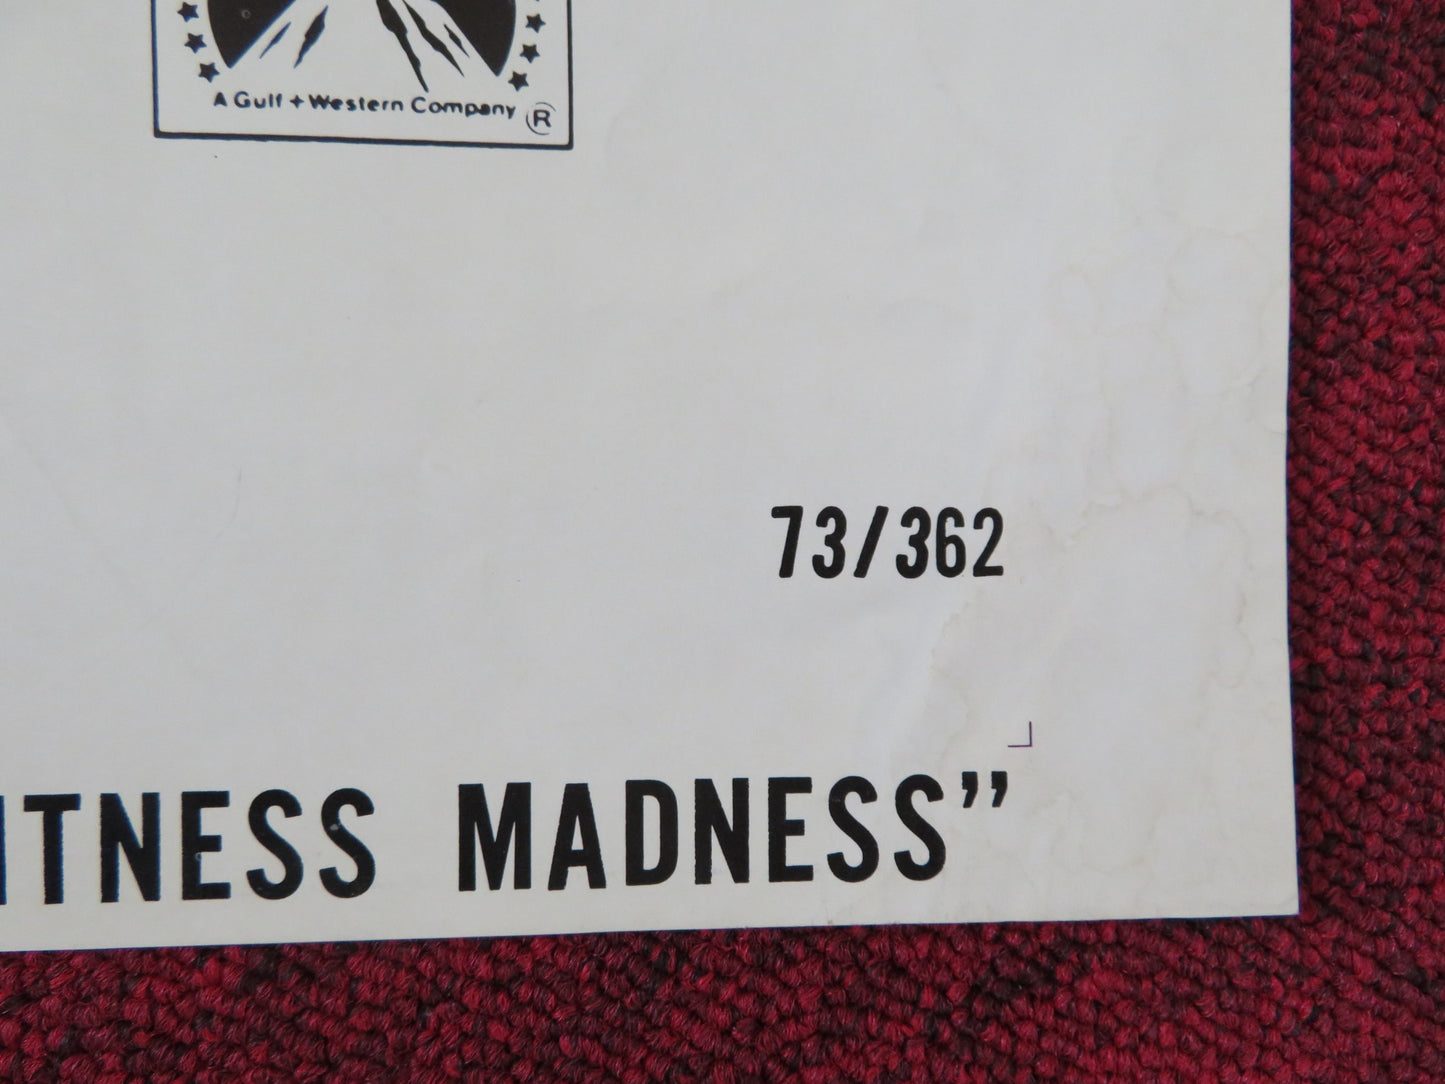 TALES THAT WITNESS MADNESS FOLDED US ONE SHEET POSTER DONALD PLEASENCE 1973